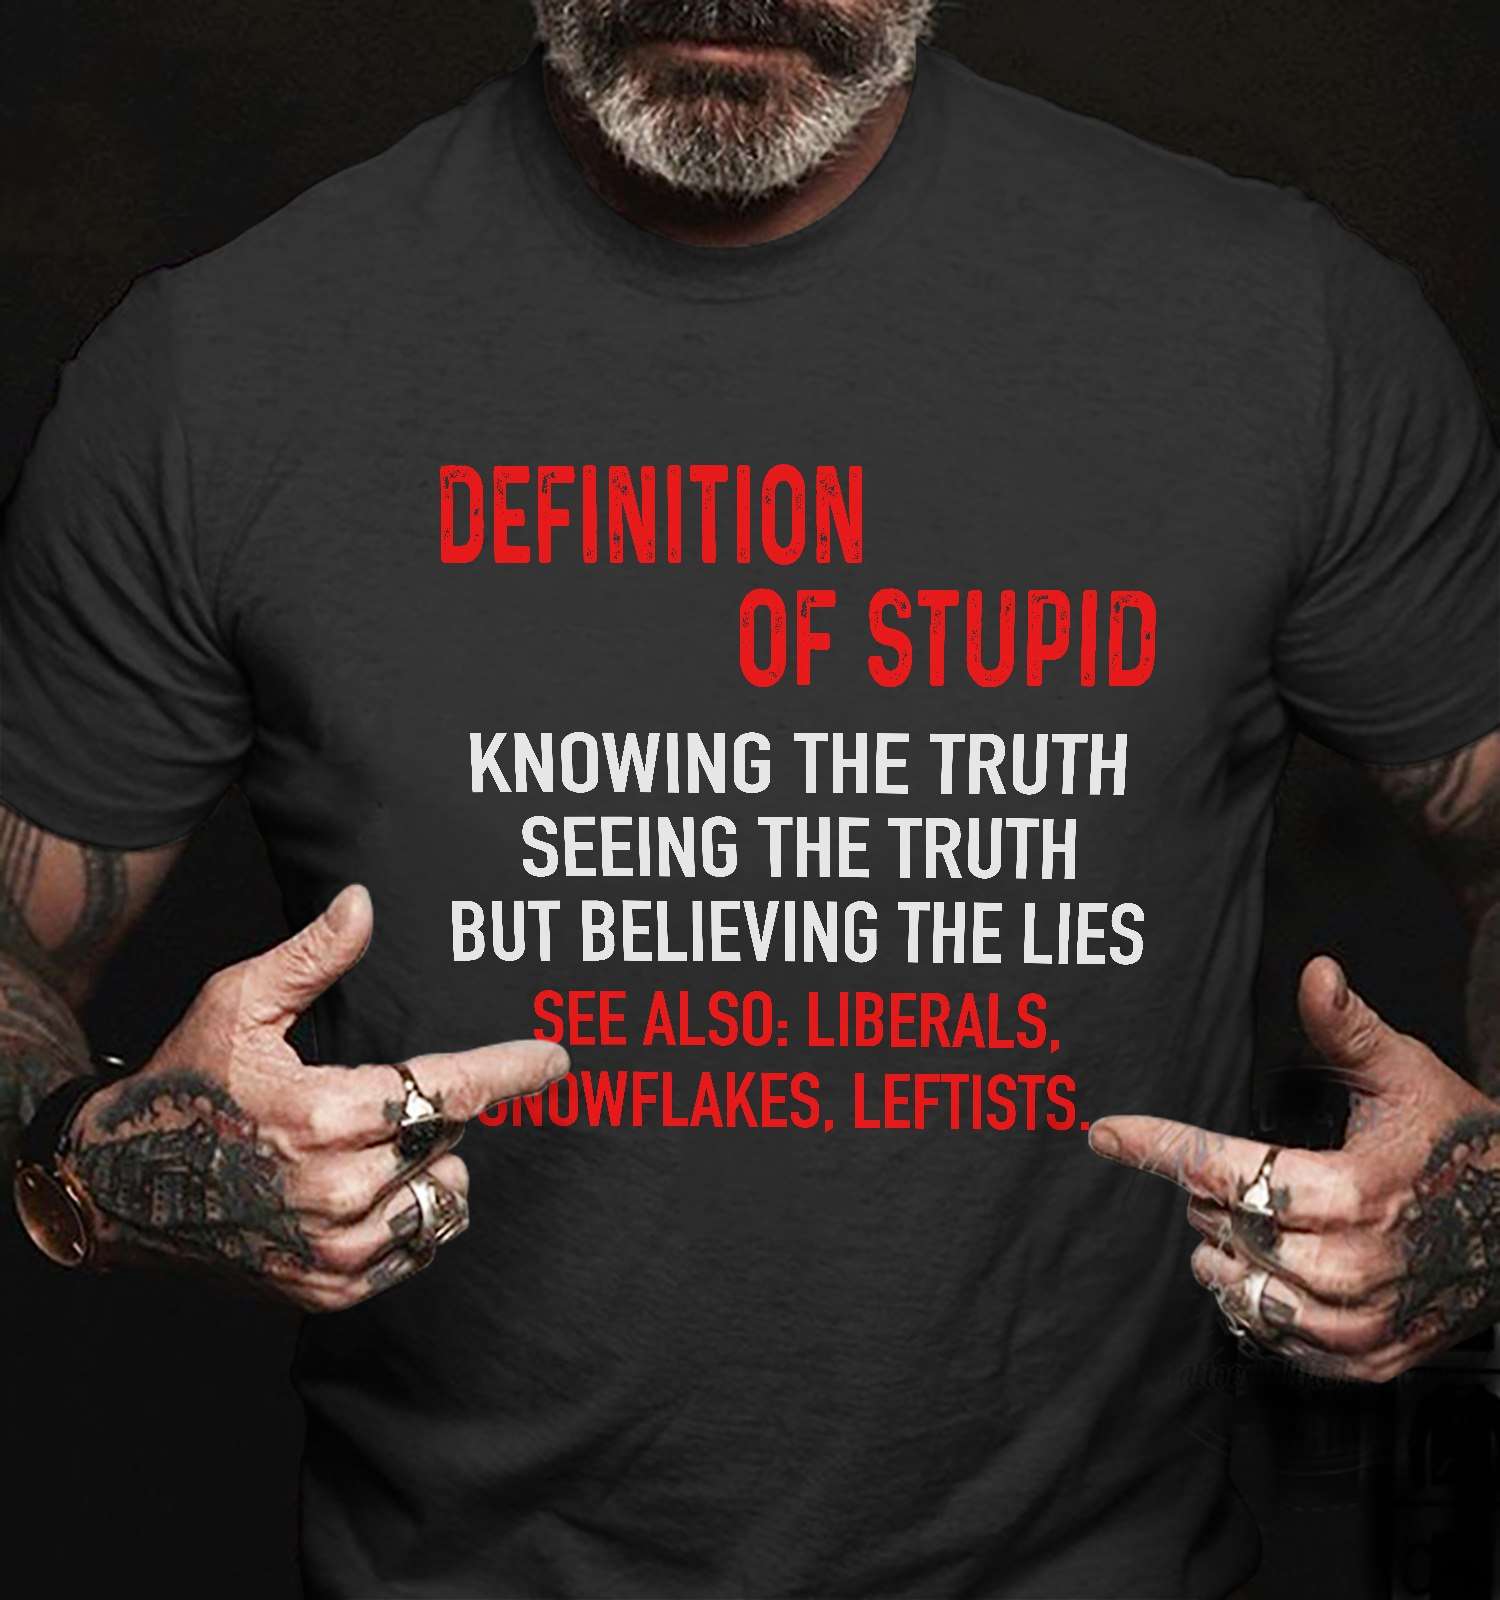 Definition of stupid - Knowing the truth, seeing the truth but believing the lies